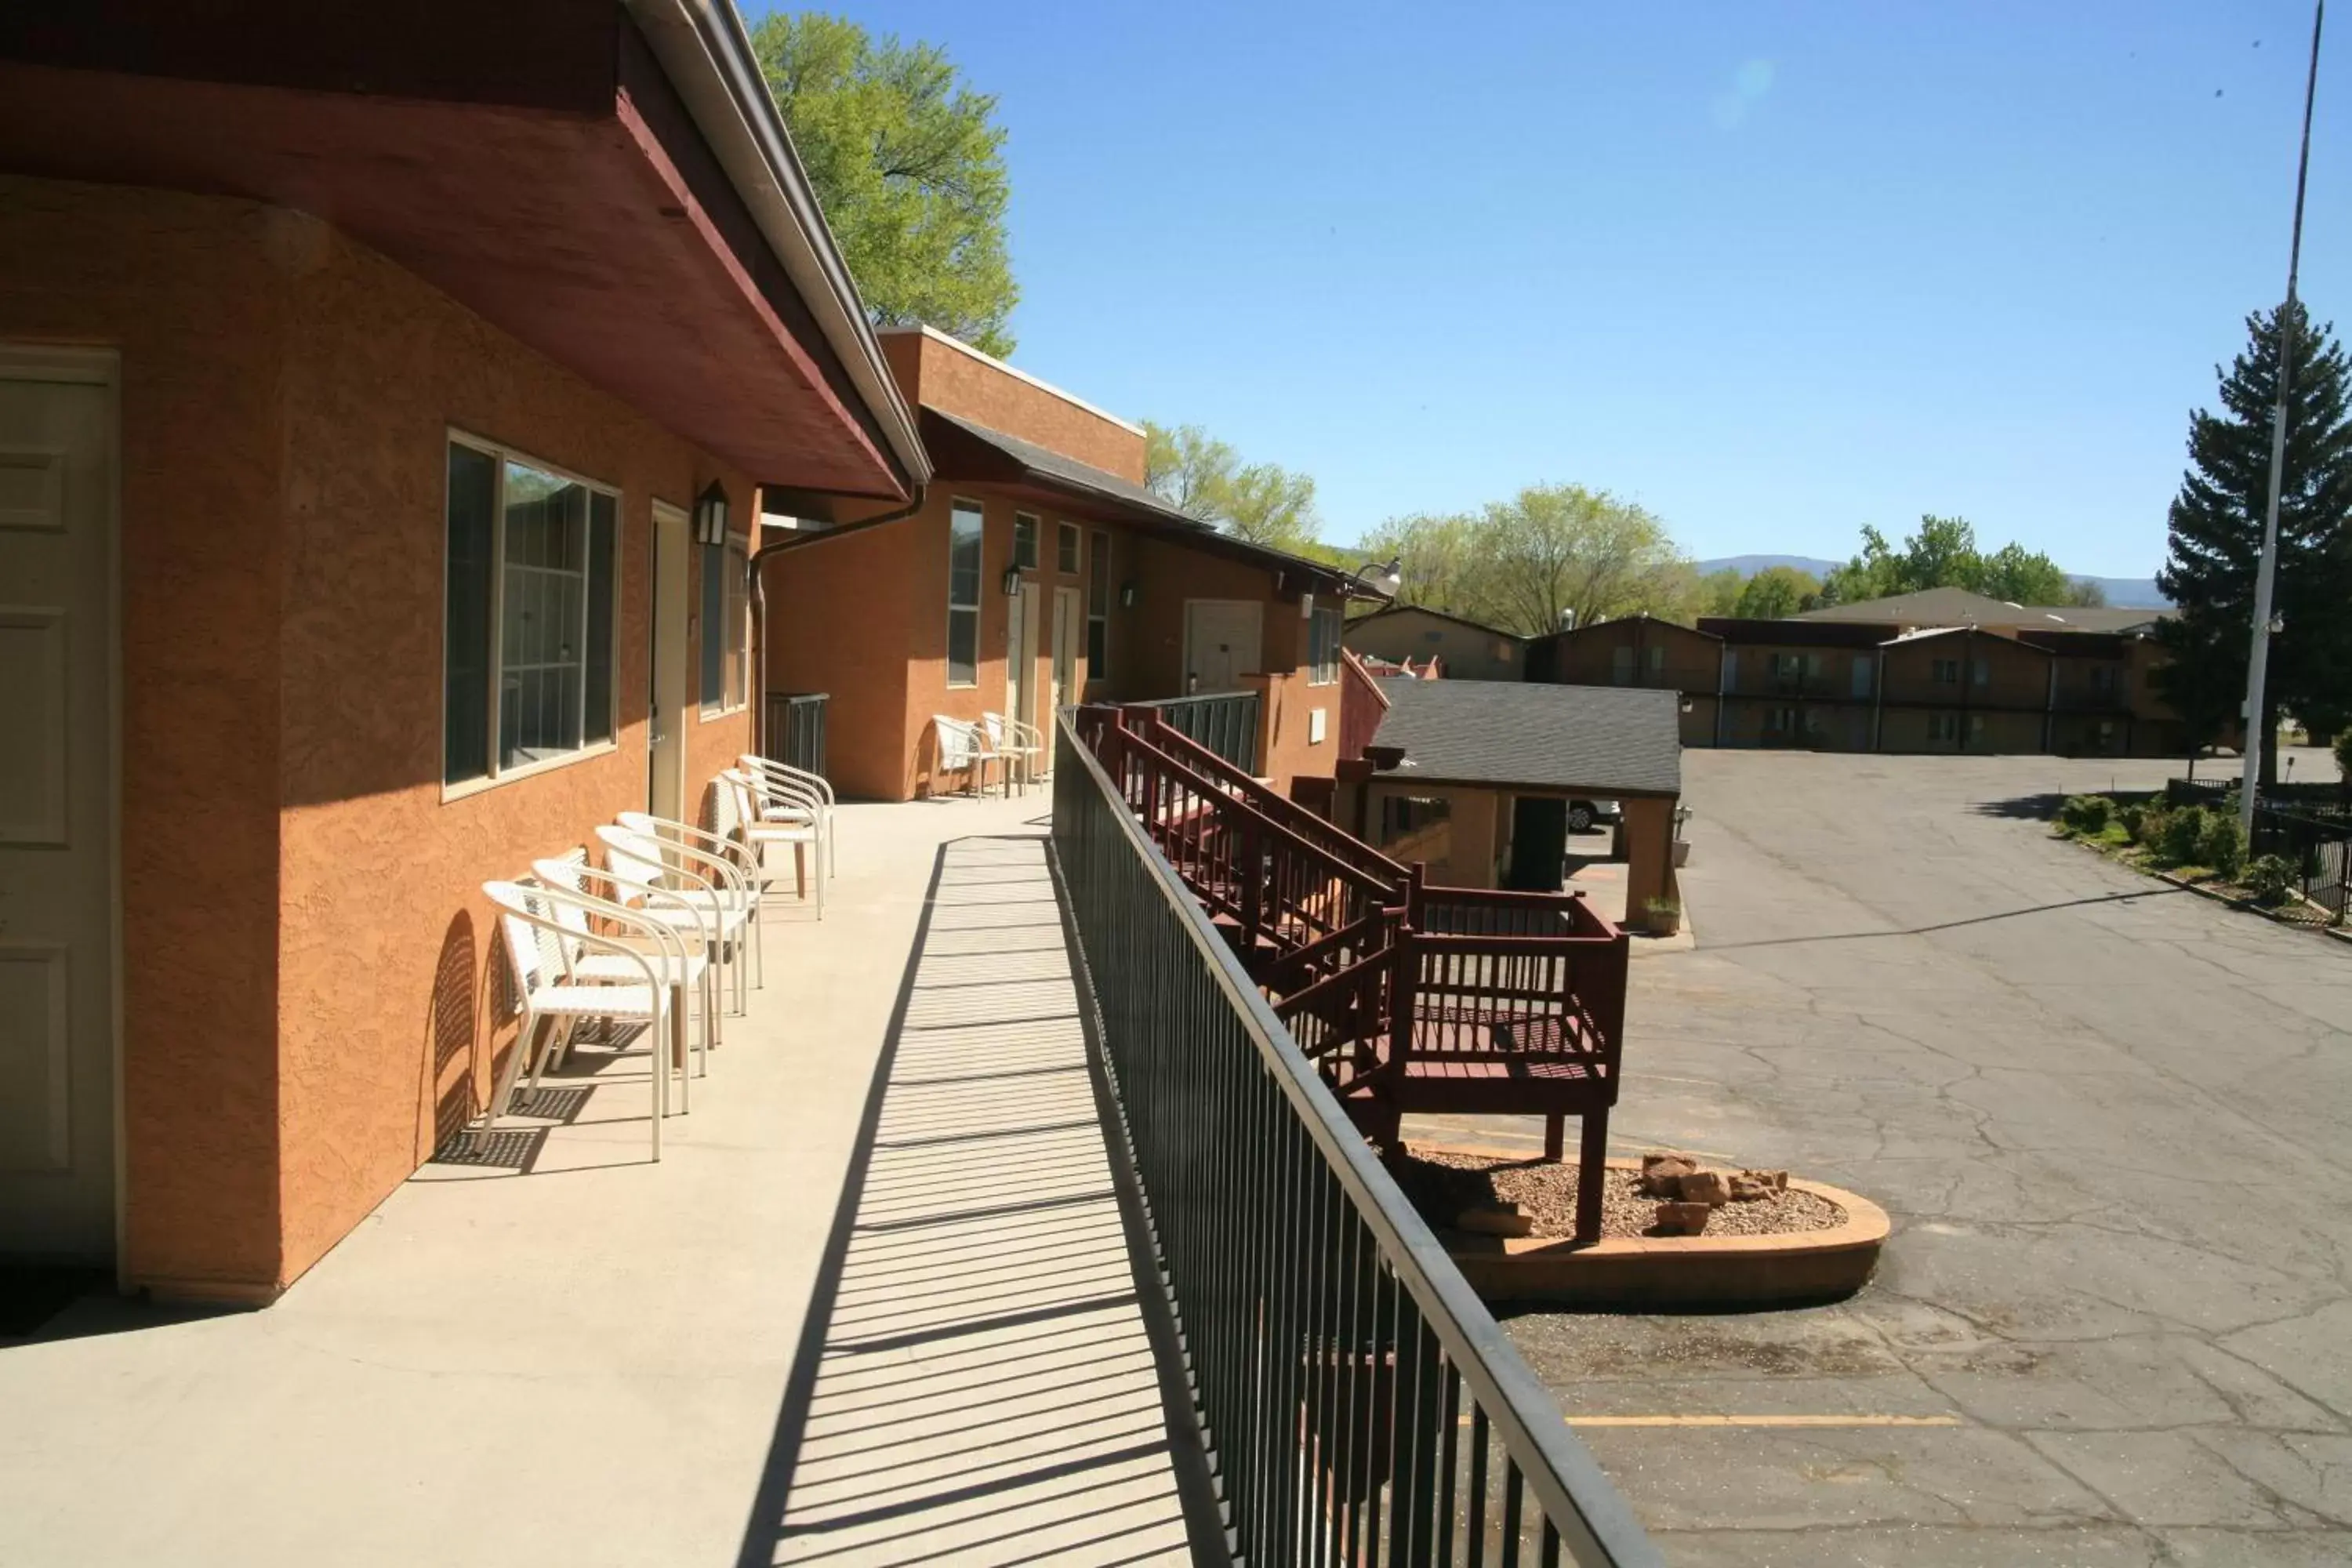 Property building in Black Canyon Motel